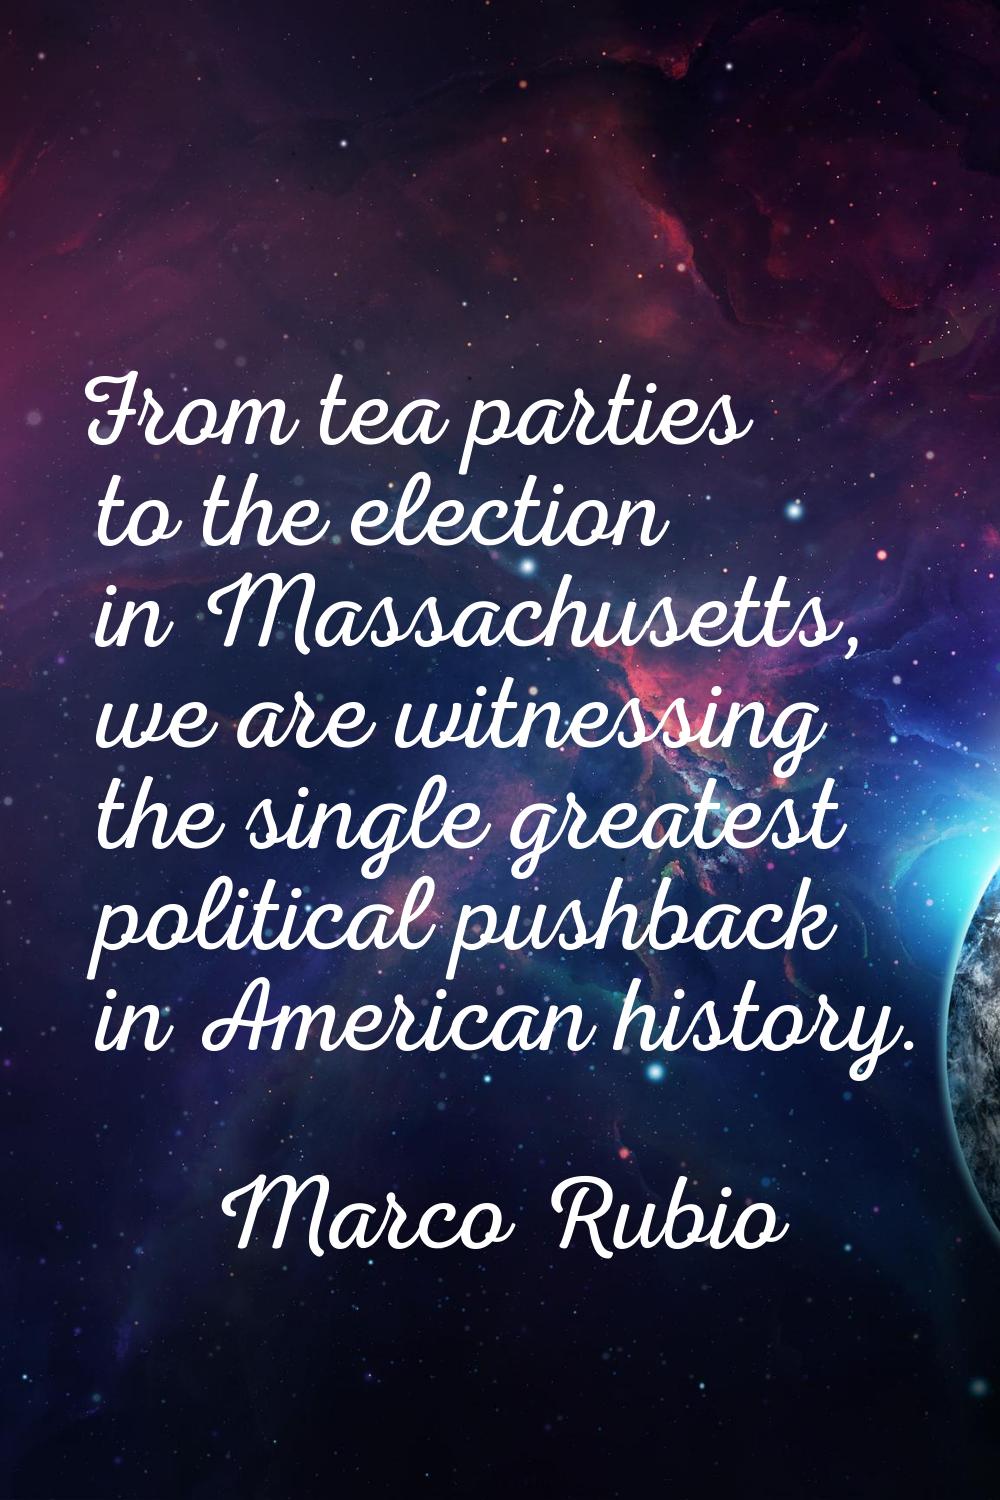 From tea parties to the election in Massachusetts, we are witnessing the single greatest political 